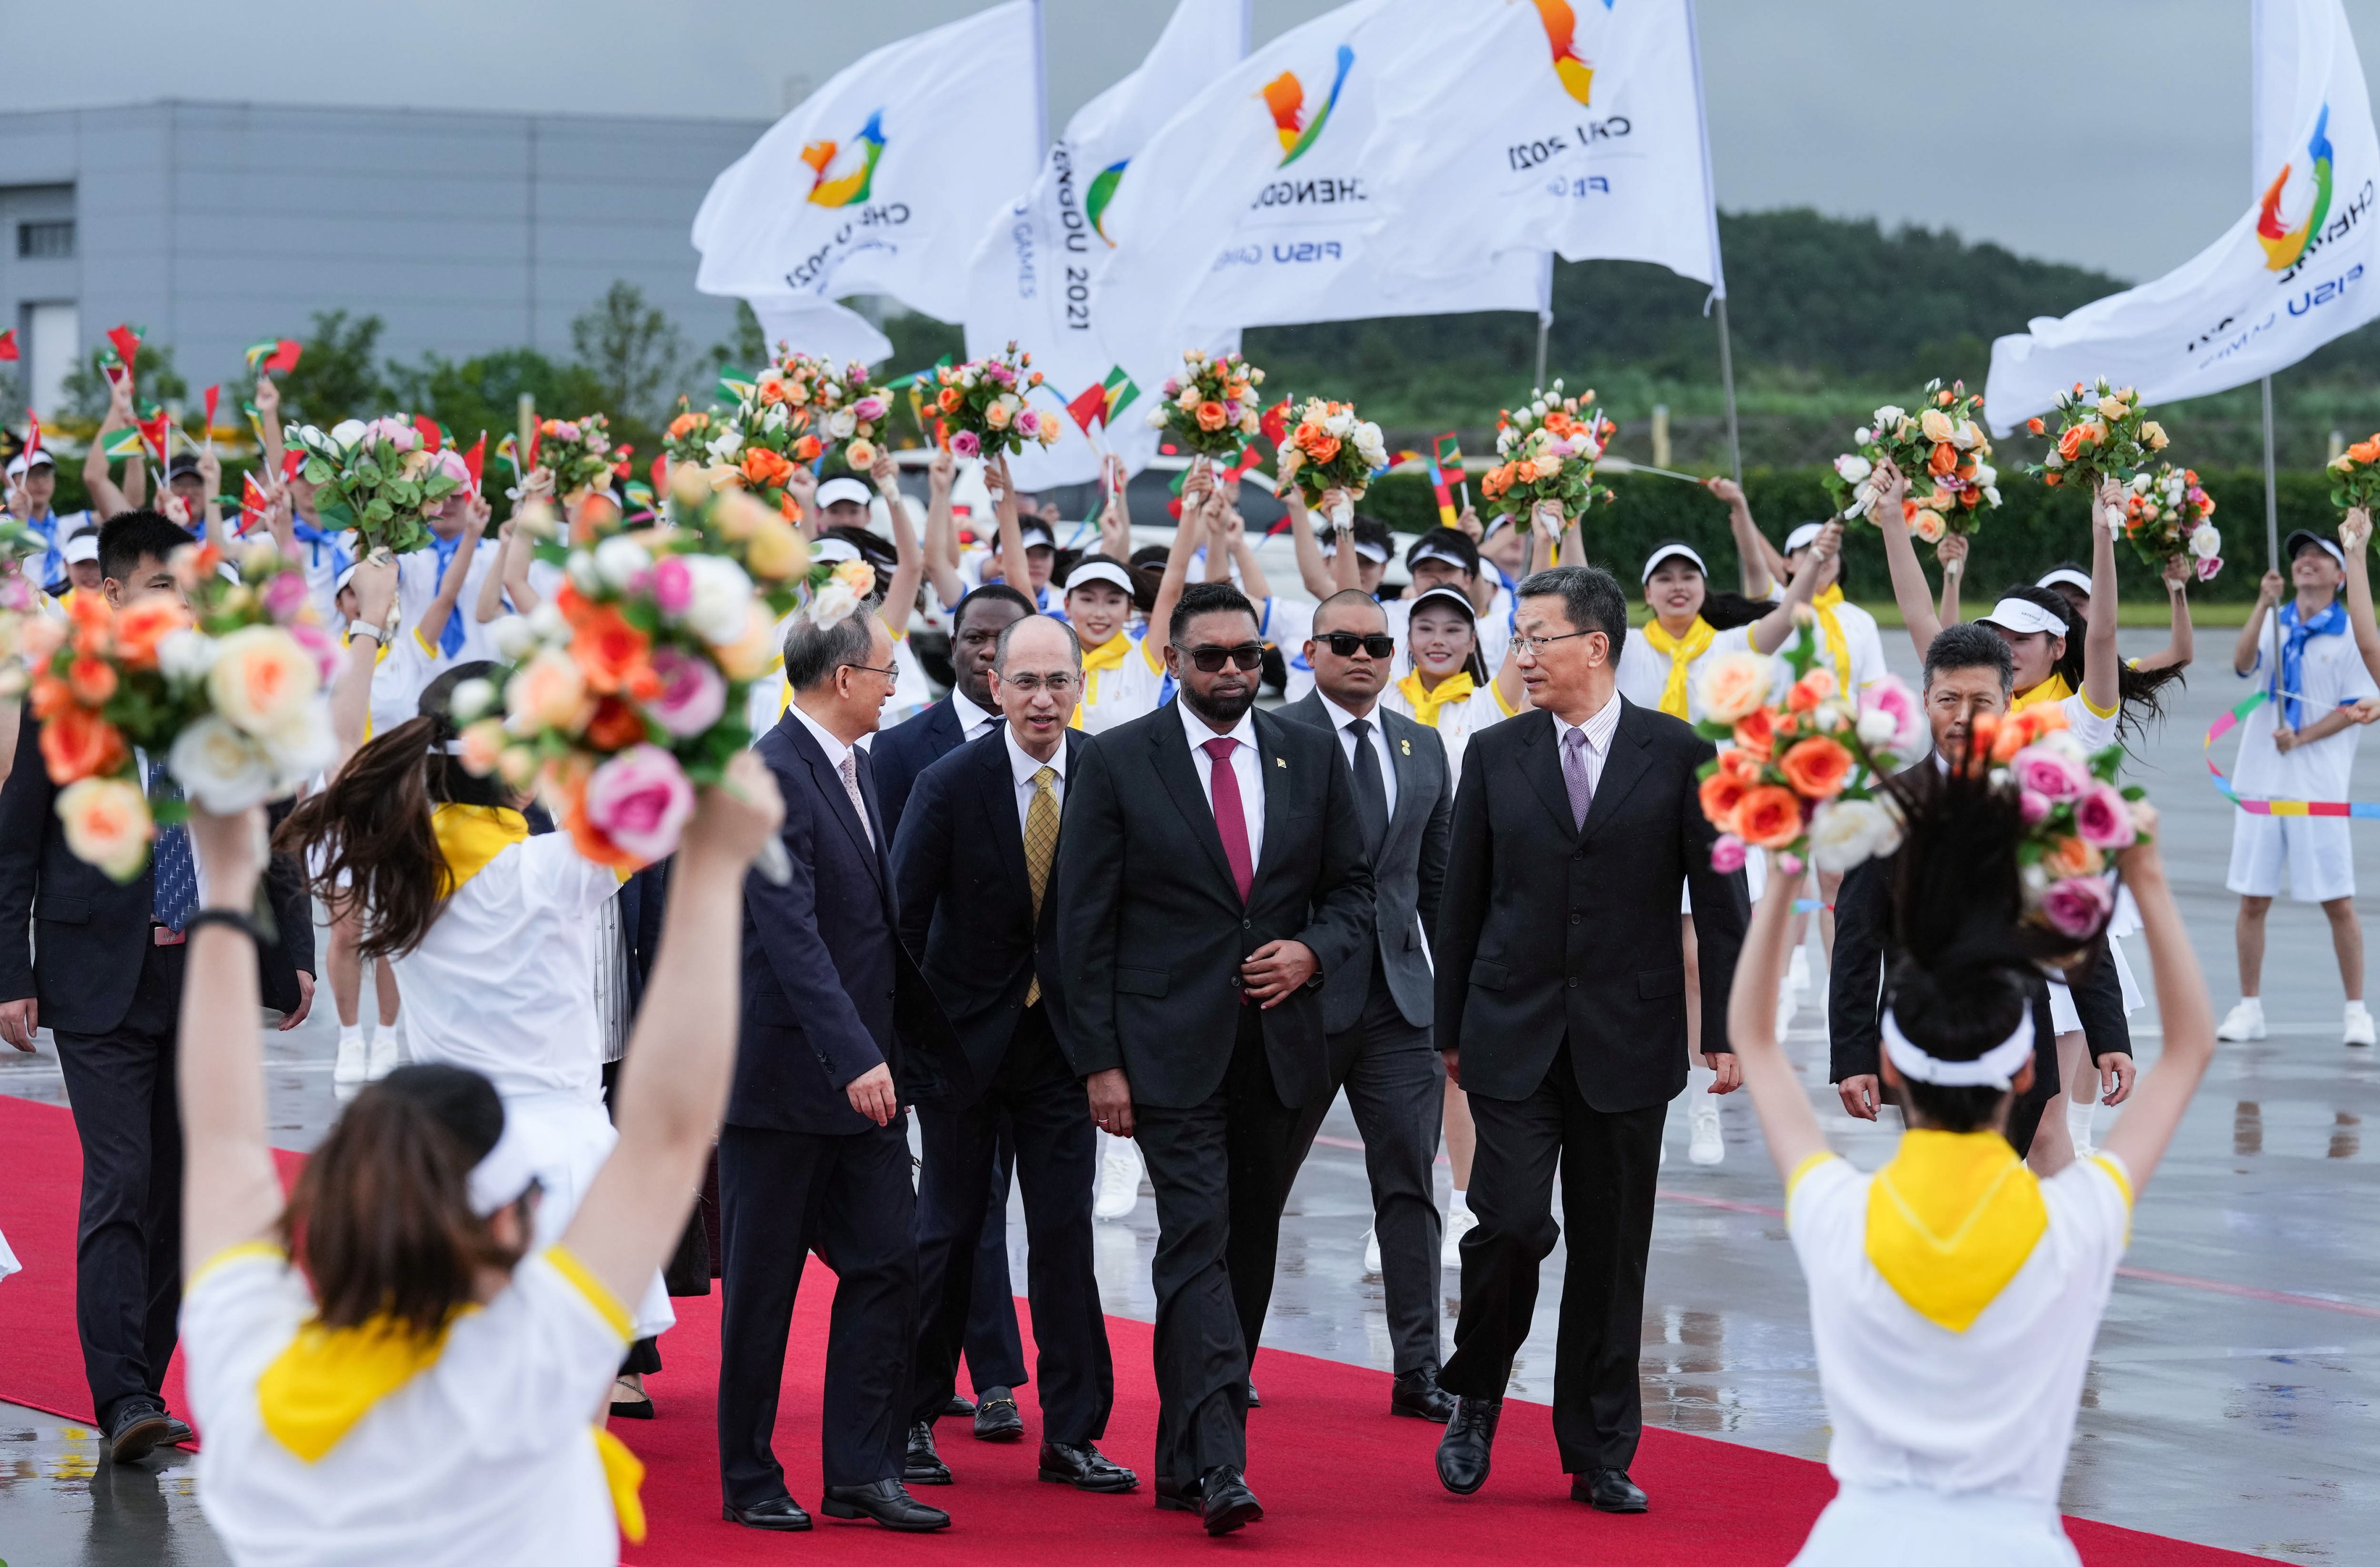 Guyanese President Mohamed Irfaan Ali visited the World University Games in Chengdu during his trip to China. Photo: EPA-EFE